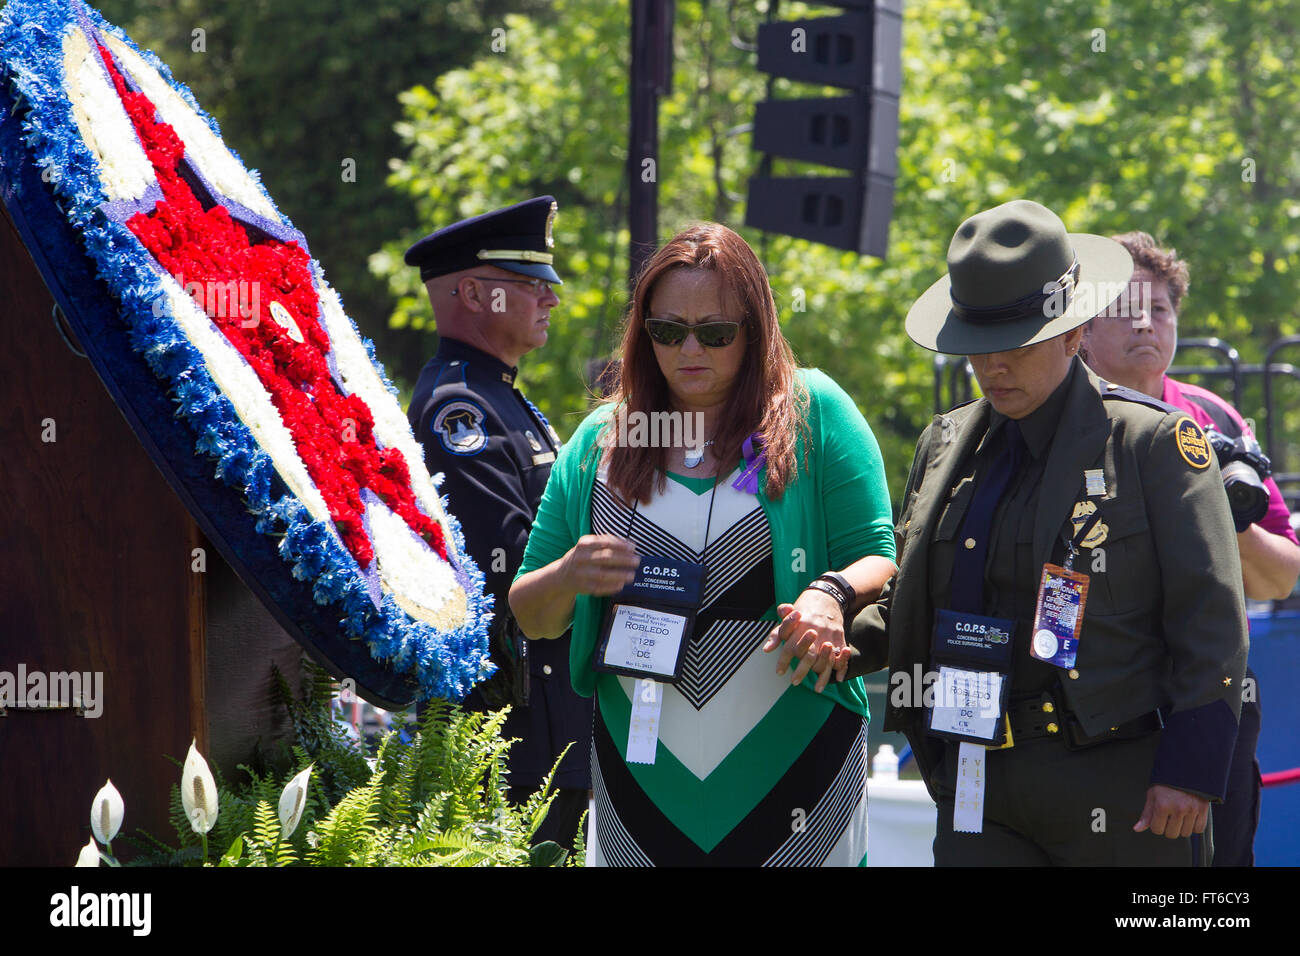 051515: Washington, DC - During Police Week the National Peace Officer's Memorial Service was held at the Capitol in honor of fallen agents and officers across the nation.  The mother of fallen agent Tyler Robledo is escorted by a Border Patrol agent after pinning a memorial flower to the wreath during the Roll Call of Heroes of 2014. Photographer: Donna Burton Stock Photo